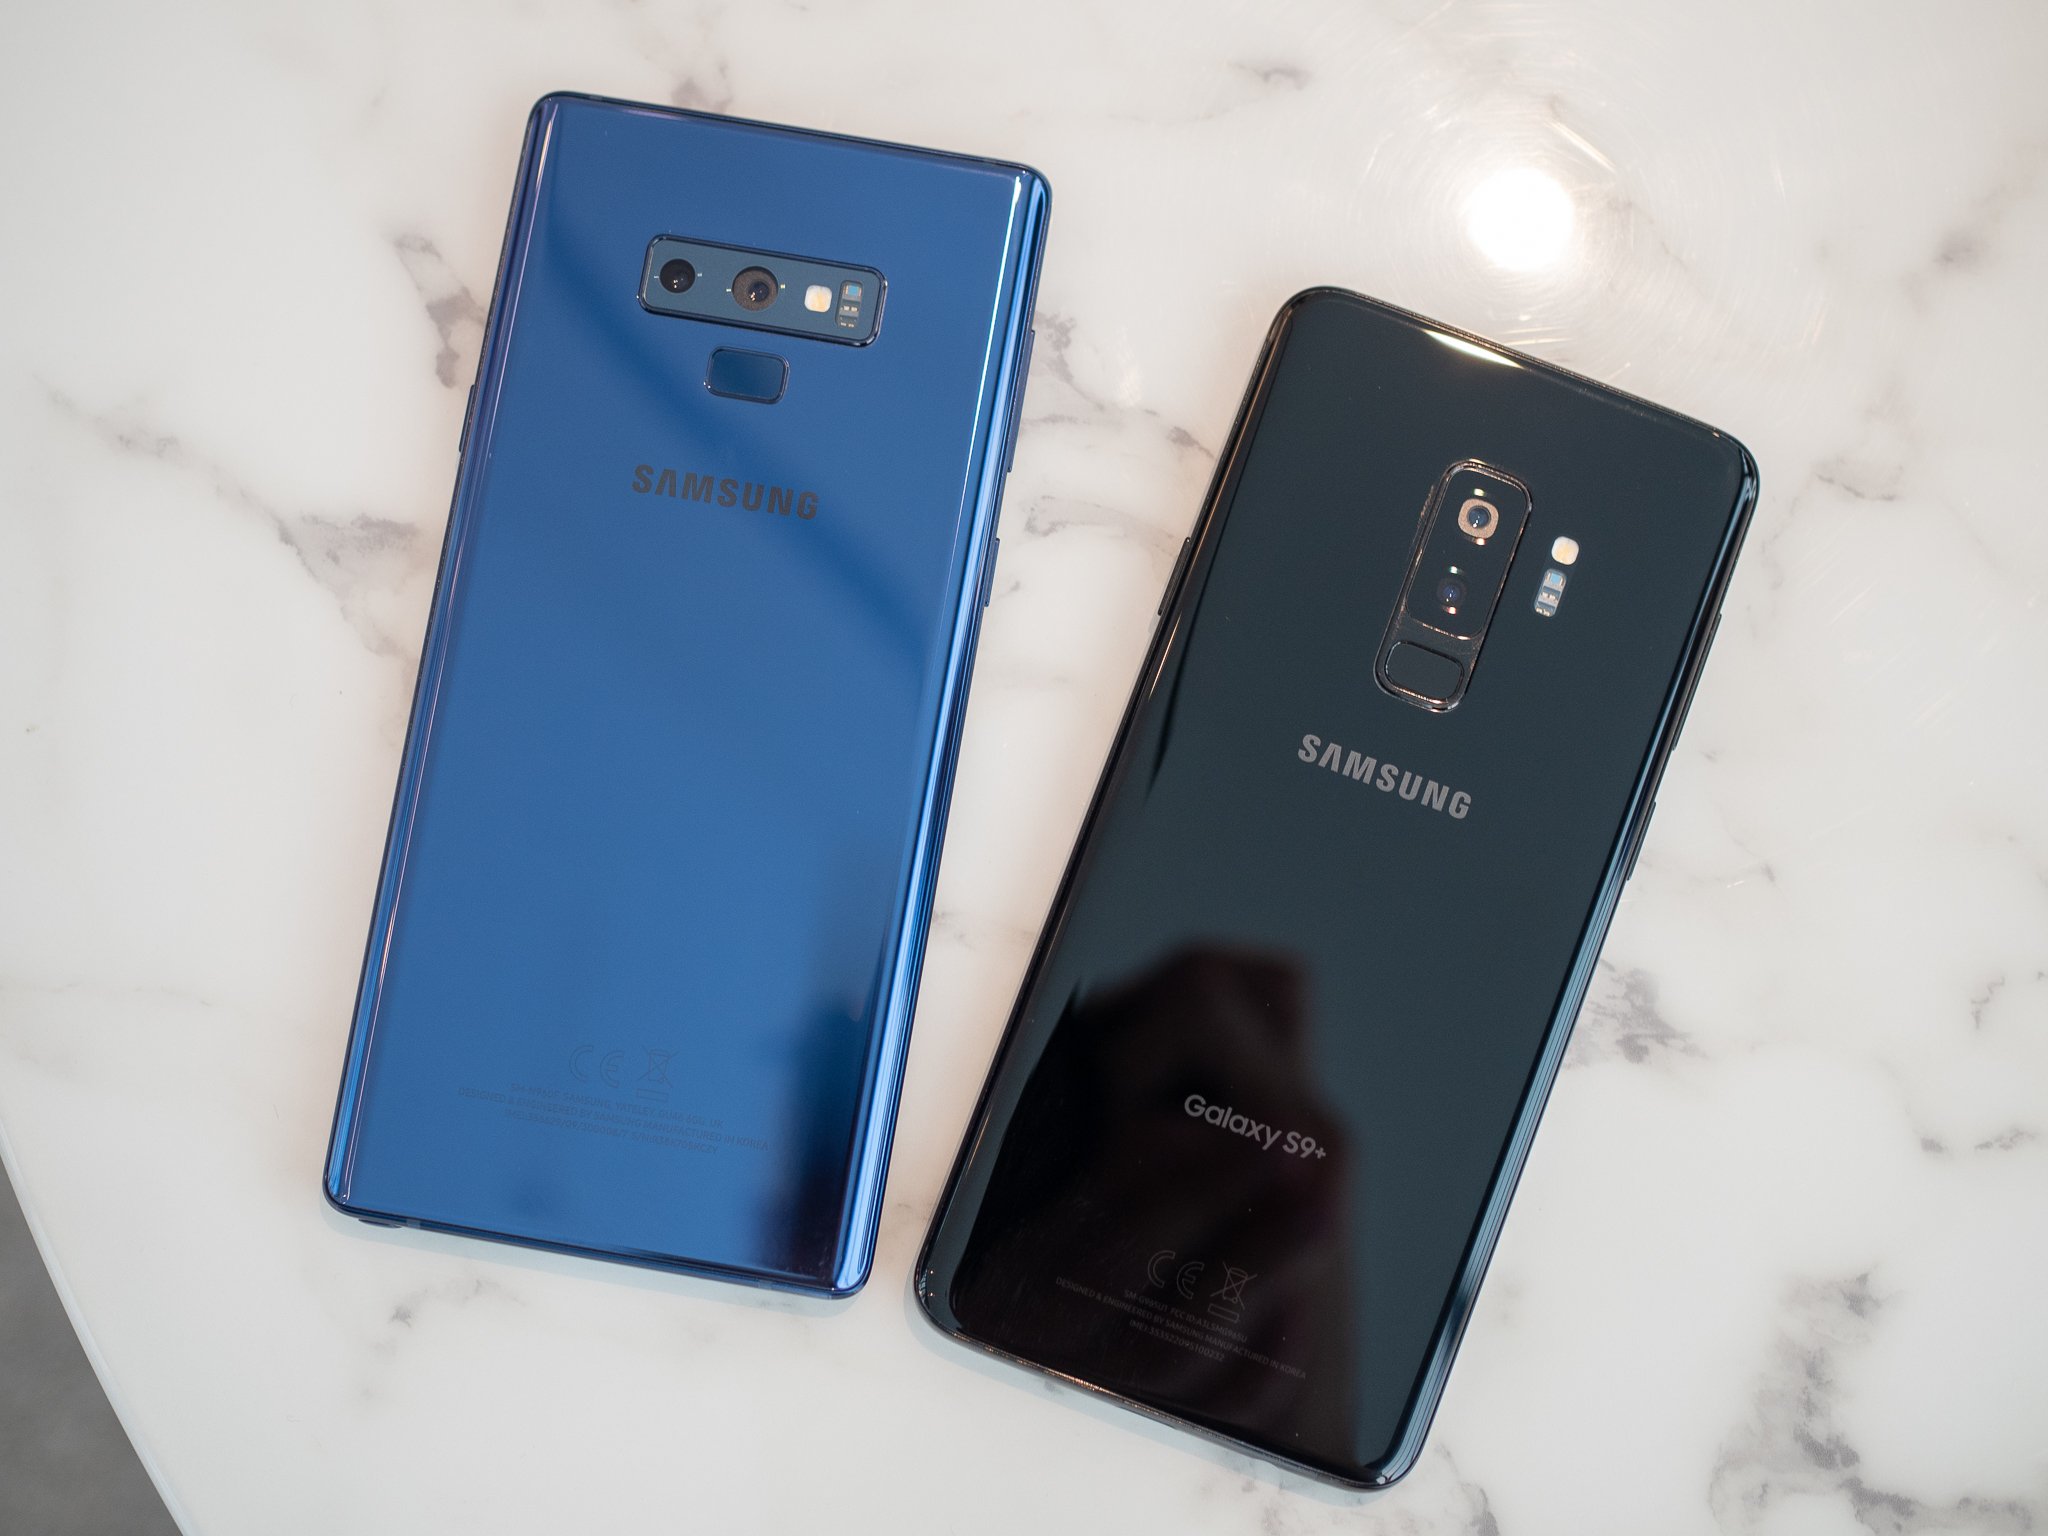 Galaxy S9 vs. Galaxy S9 Plus: What's the difference? - CNET